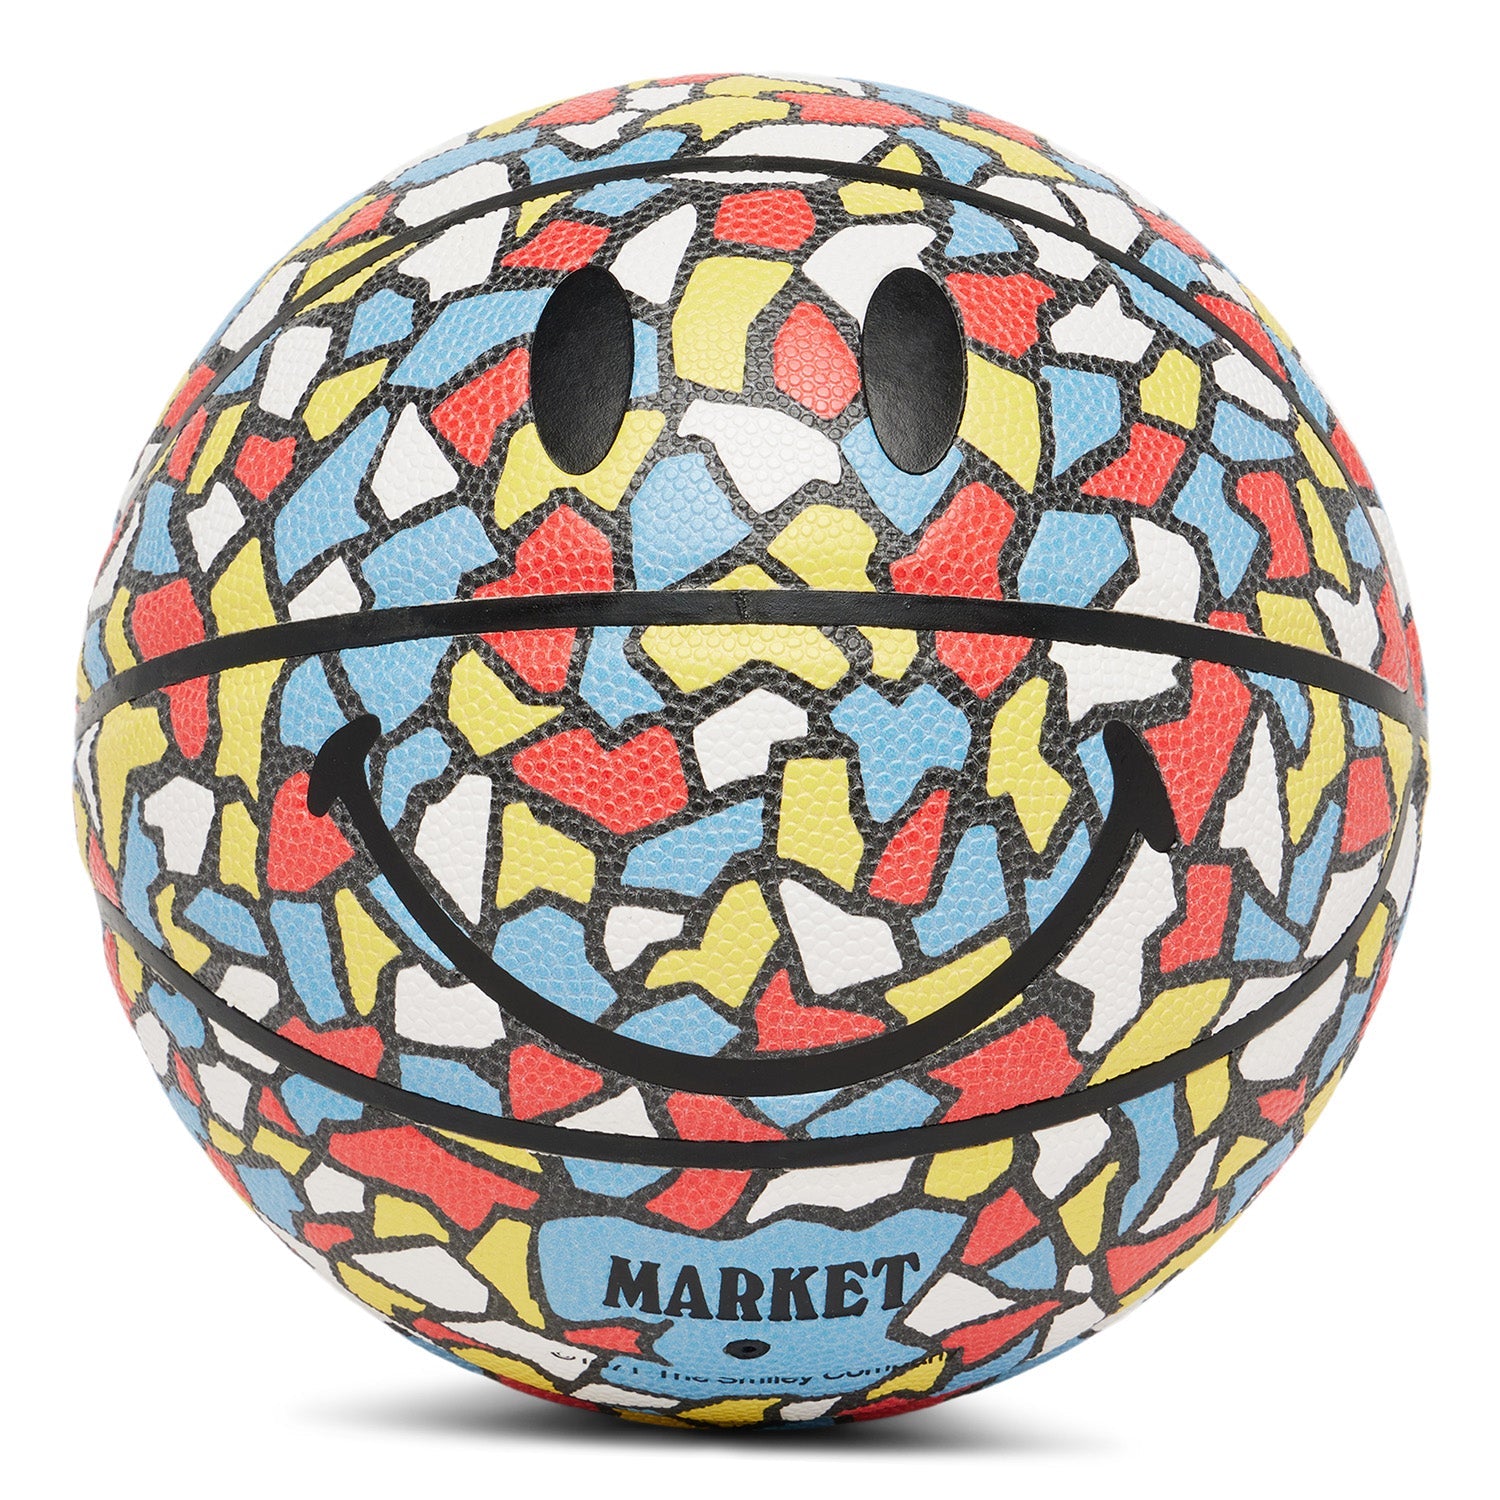 Market Smiley Mosaic Basketball - ACCESSORIES - Canada